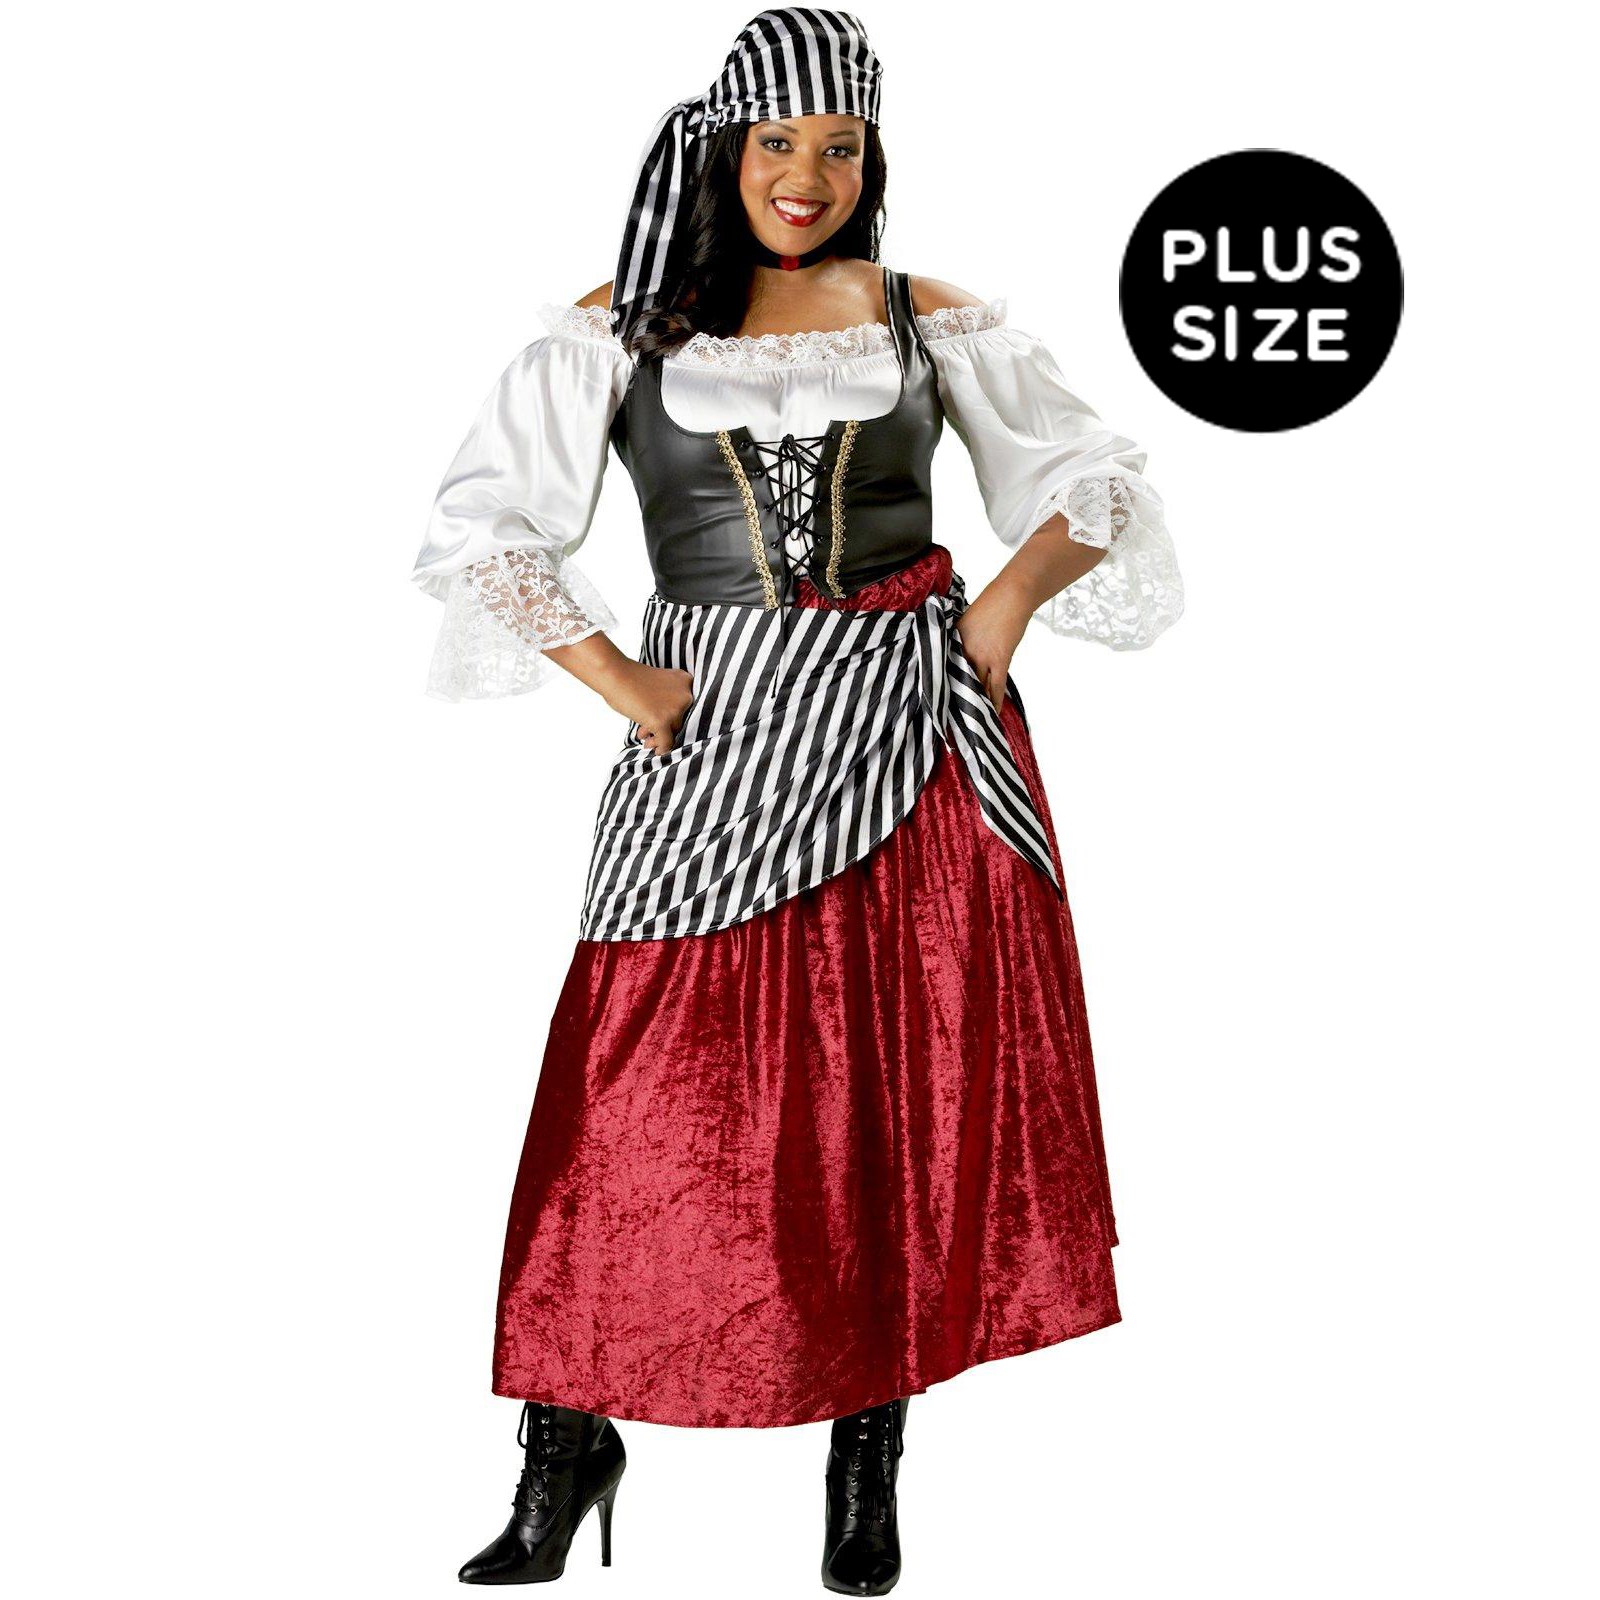 Pirates Wench Elite Collection Adult Plus Costume